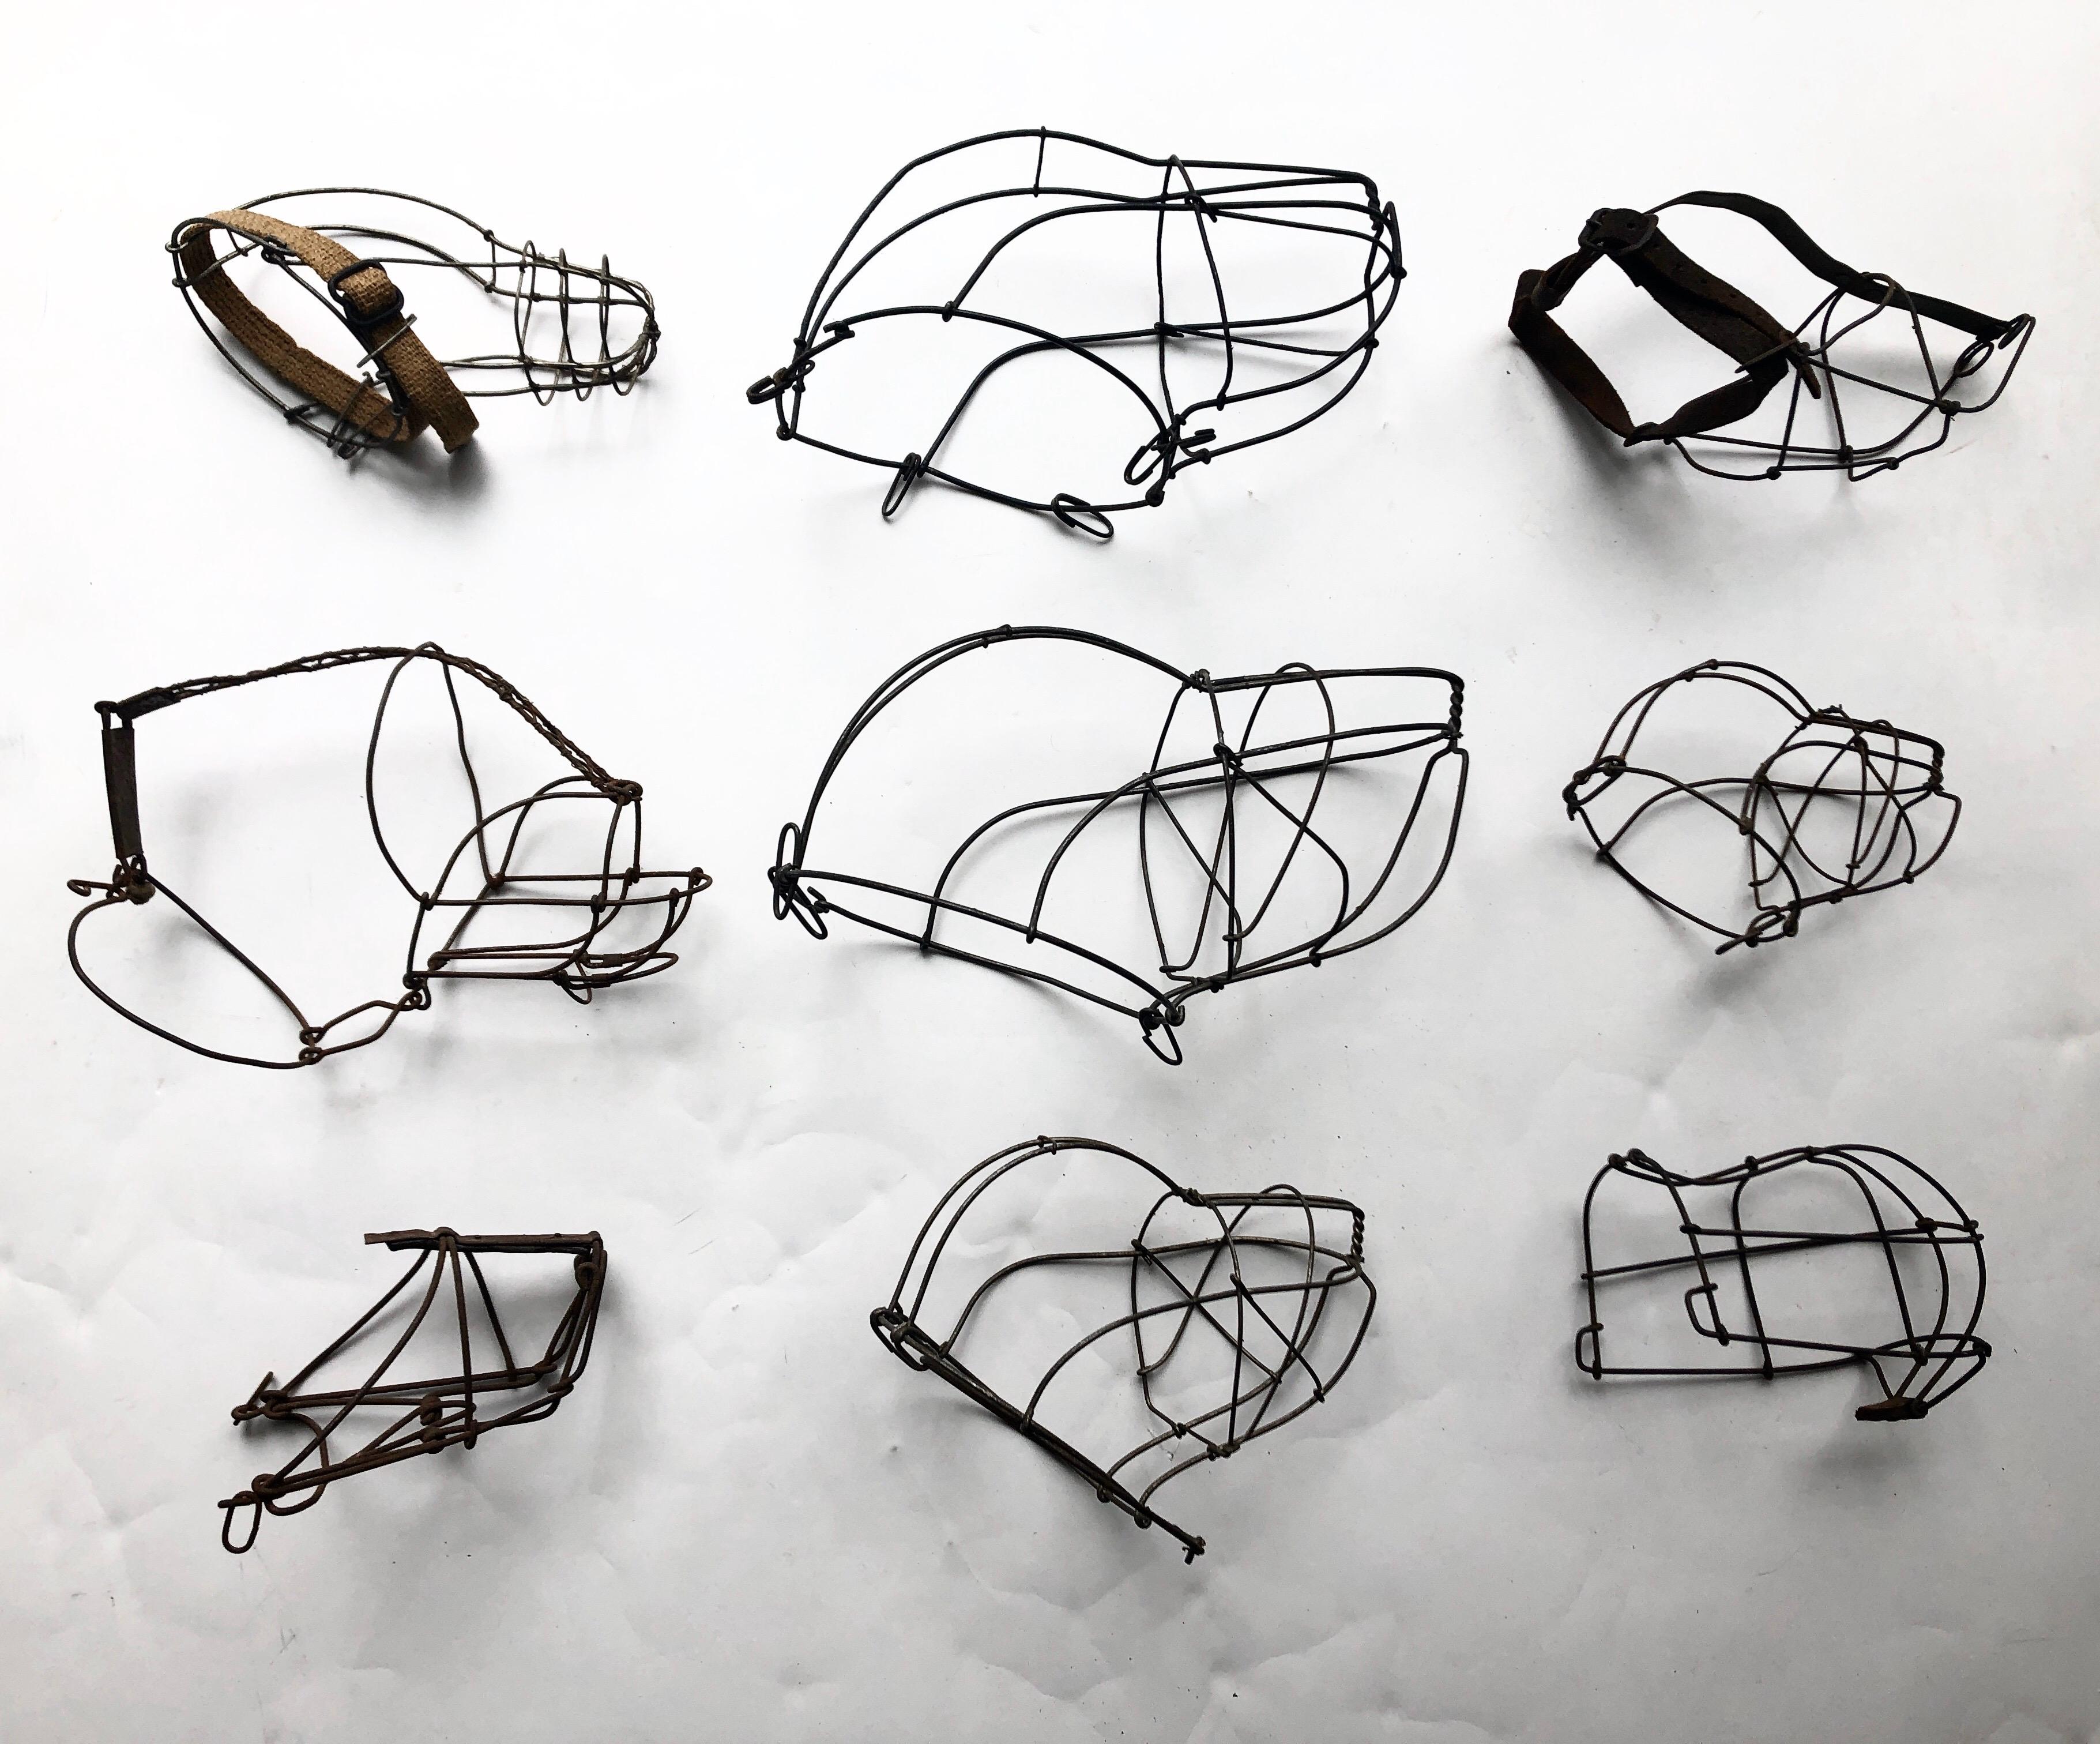 A collection of 9 antique wire dog muzzles in various shapes and designs. All are like miniature sculptures. Can be displayed on stands or a table. Can be mounted on a wall sideways or frontal. The largest measures 10.5